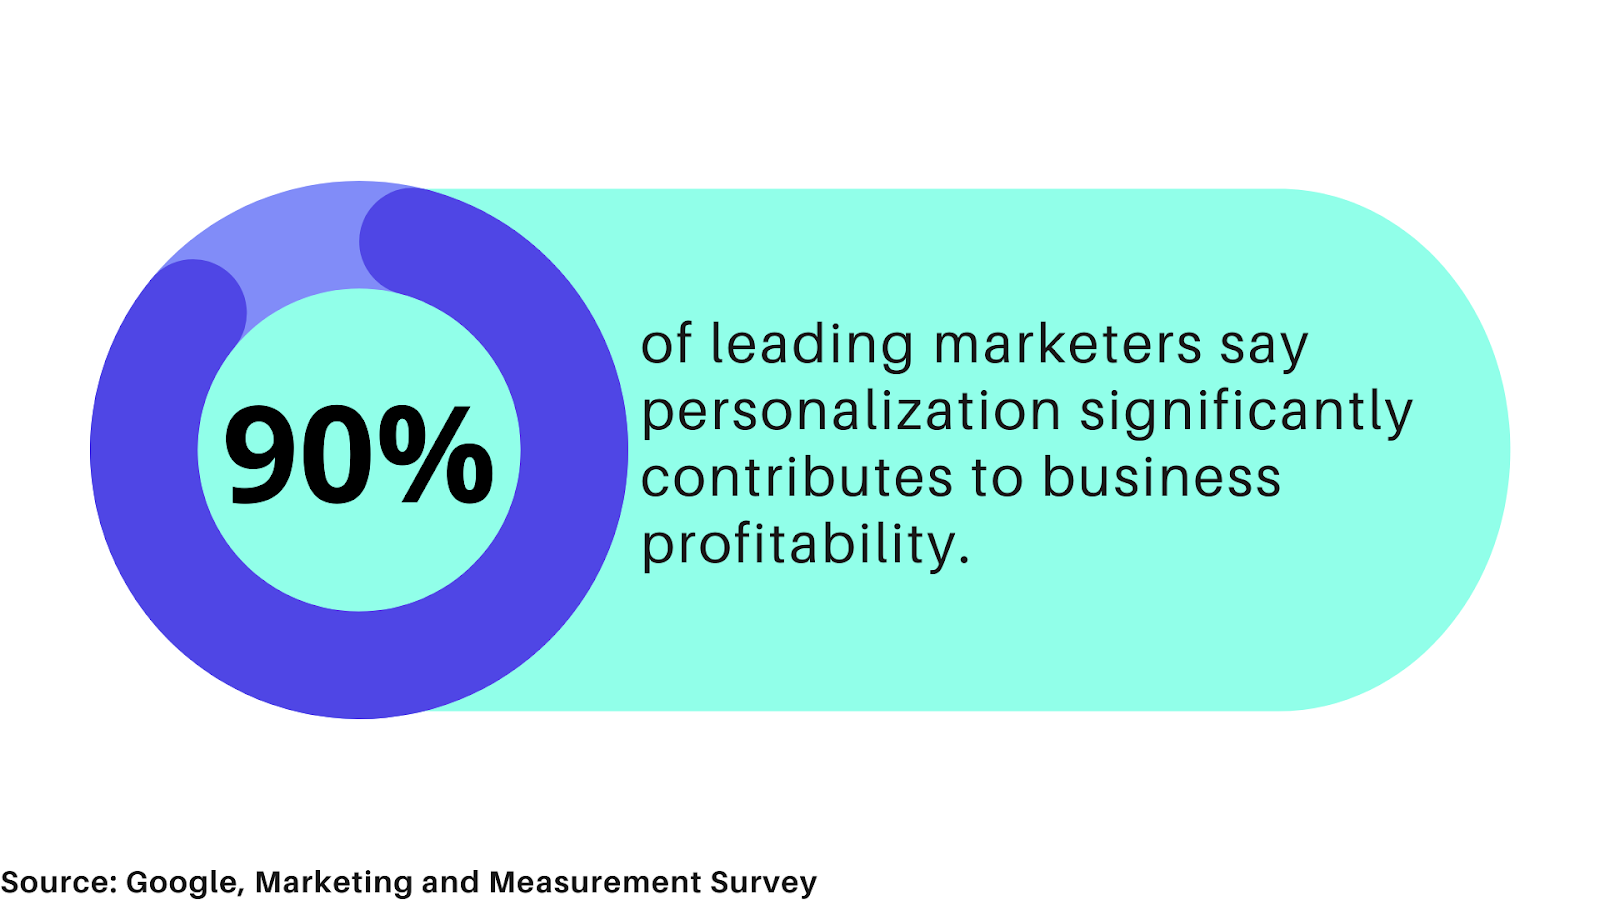 statistic about personalization